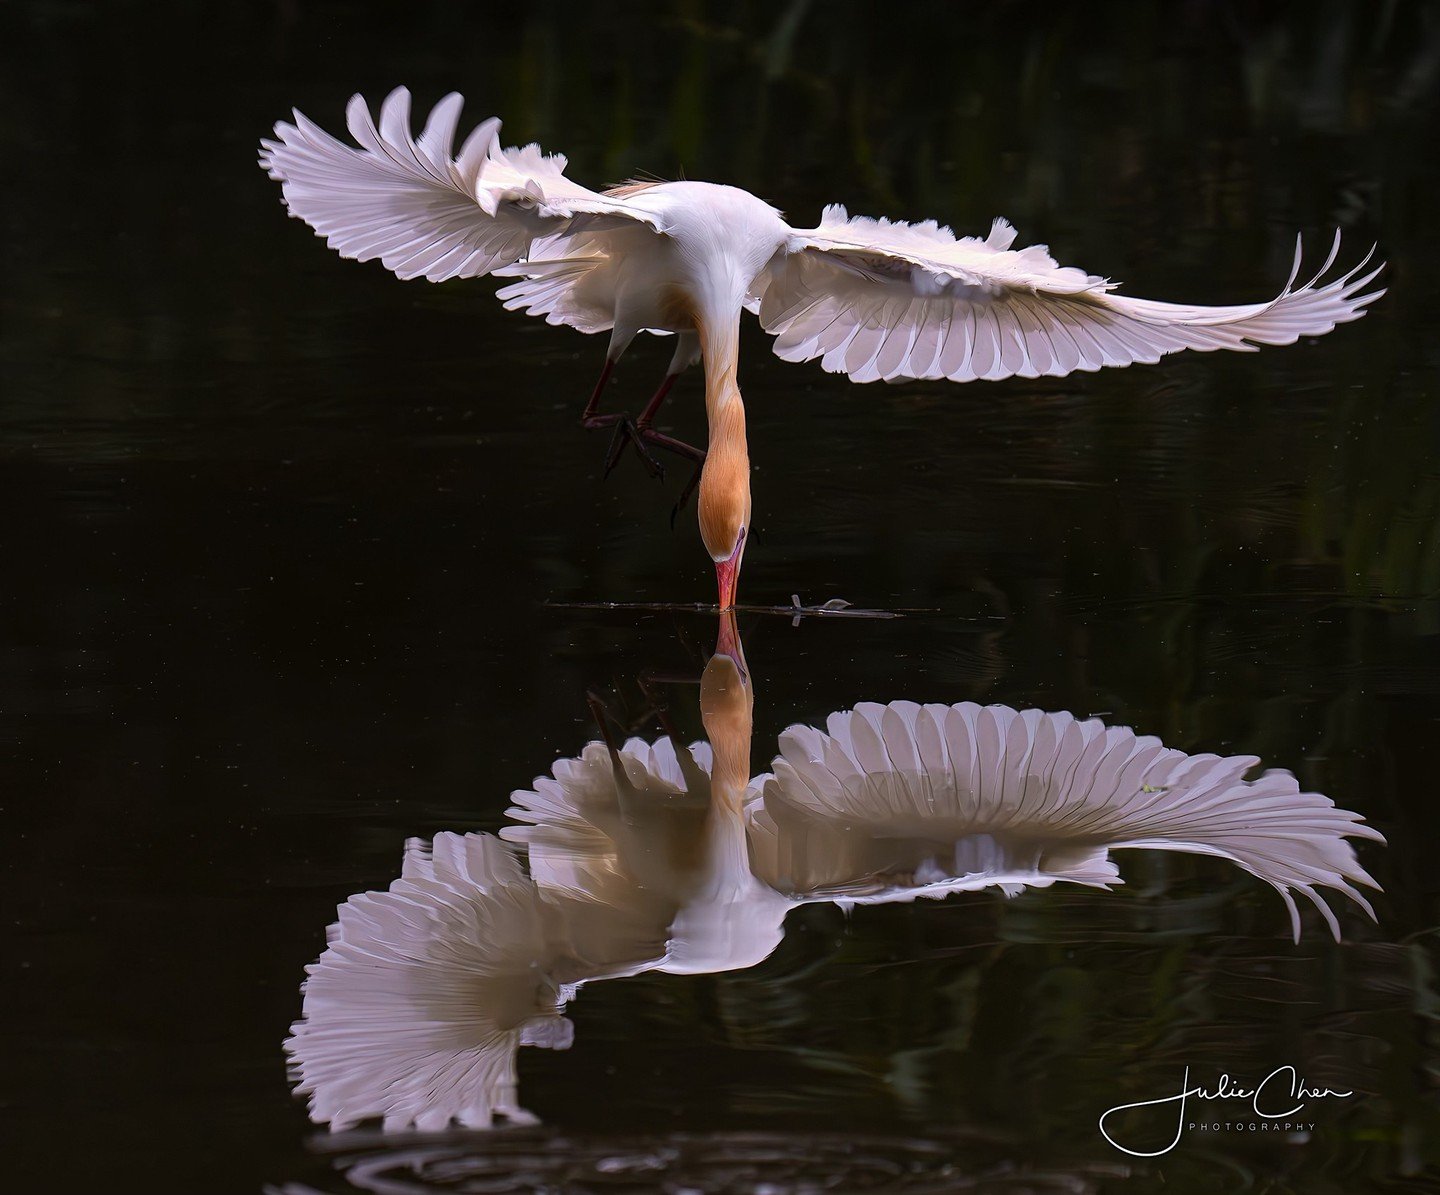 Stunning shot by member Julie Bannister Chen @slowpaddler - they've captured the reflection in the still water spectacularly 🤩

Julie writes, &quot;Picking up sticks. A bit late for the reflections assignment, but happy to catch it nevertheless just